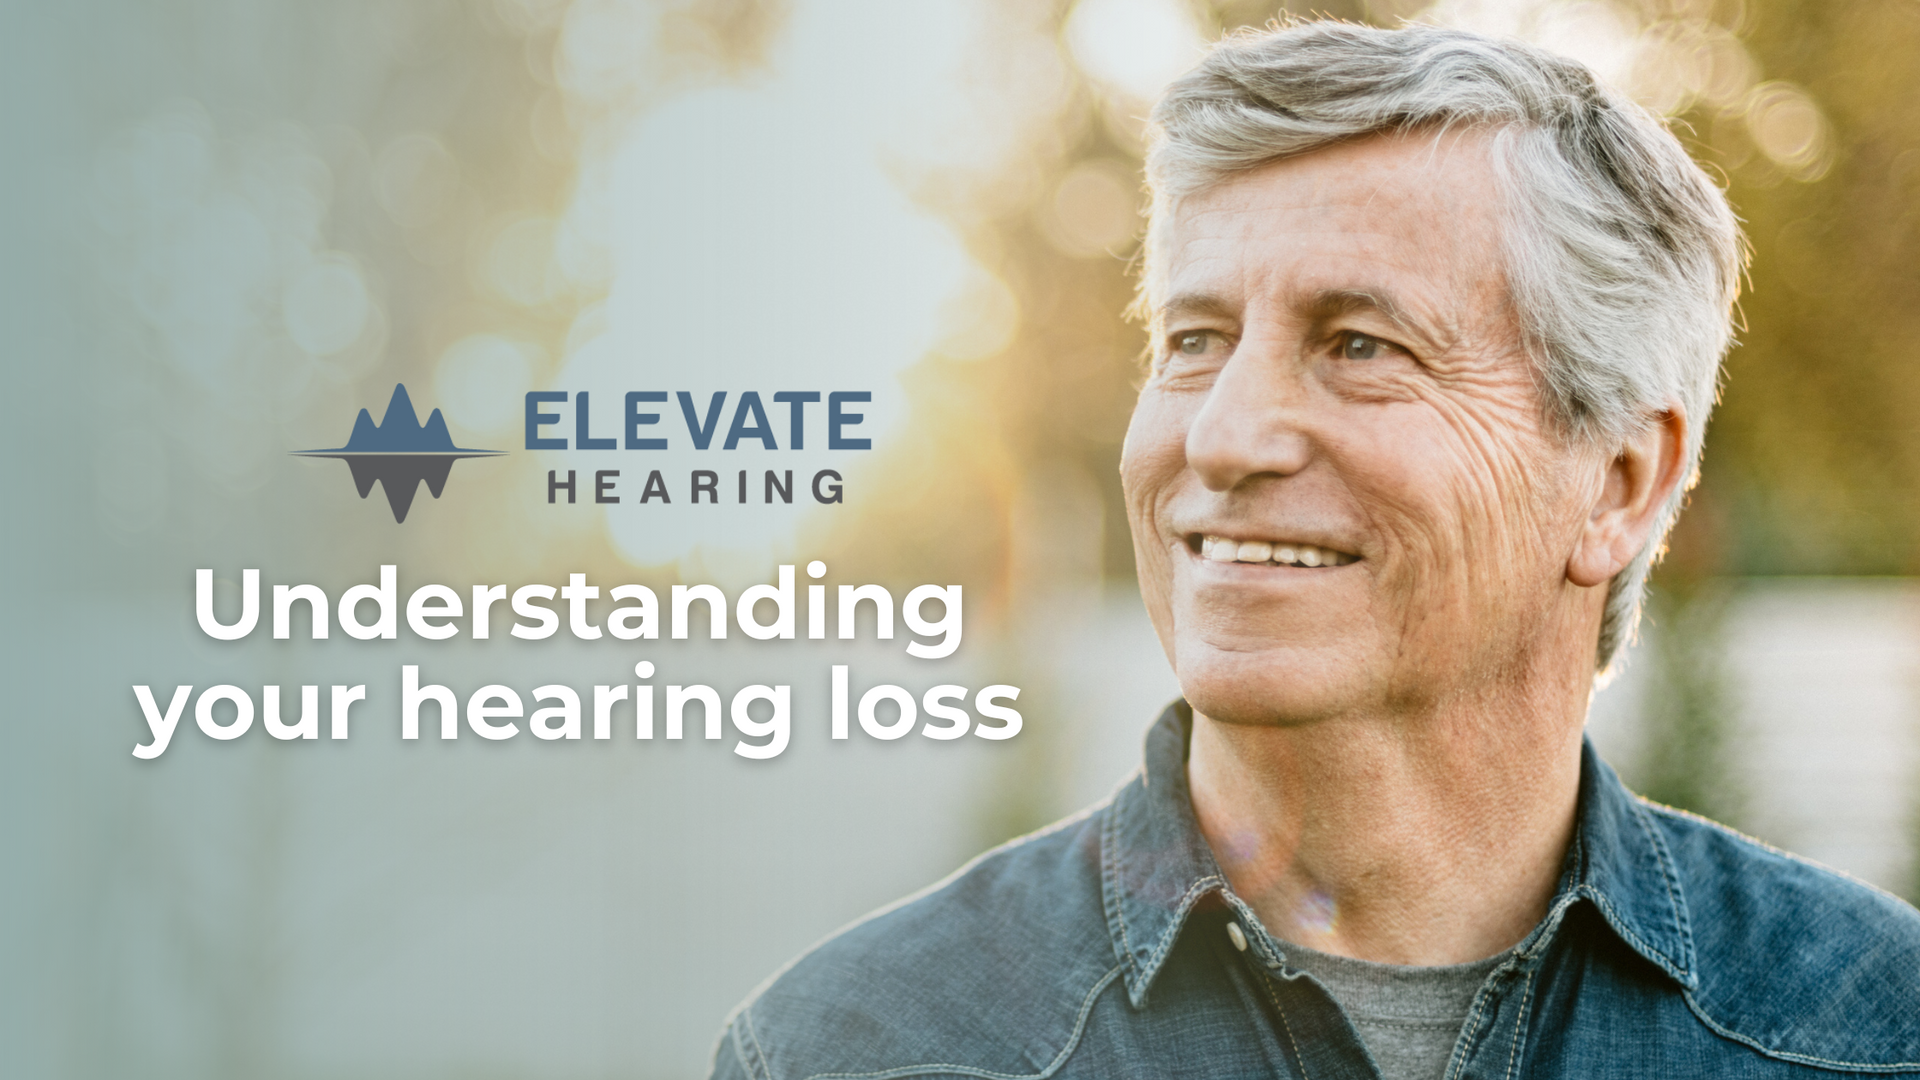 an advertisement for elevate hearing shows an older man happy to hear